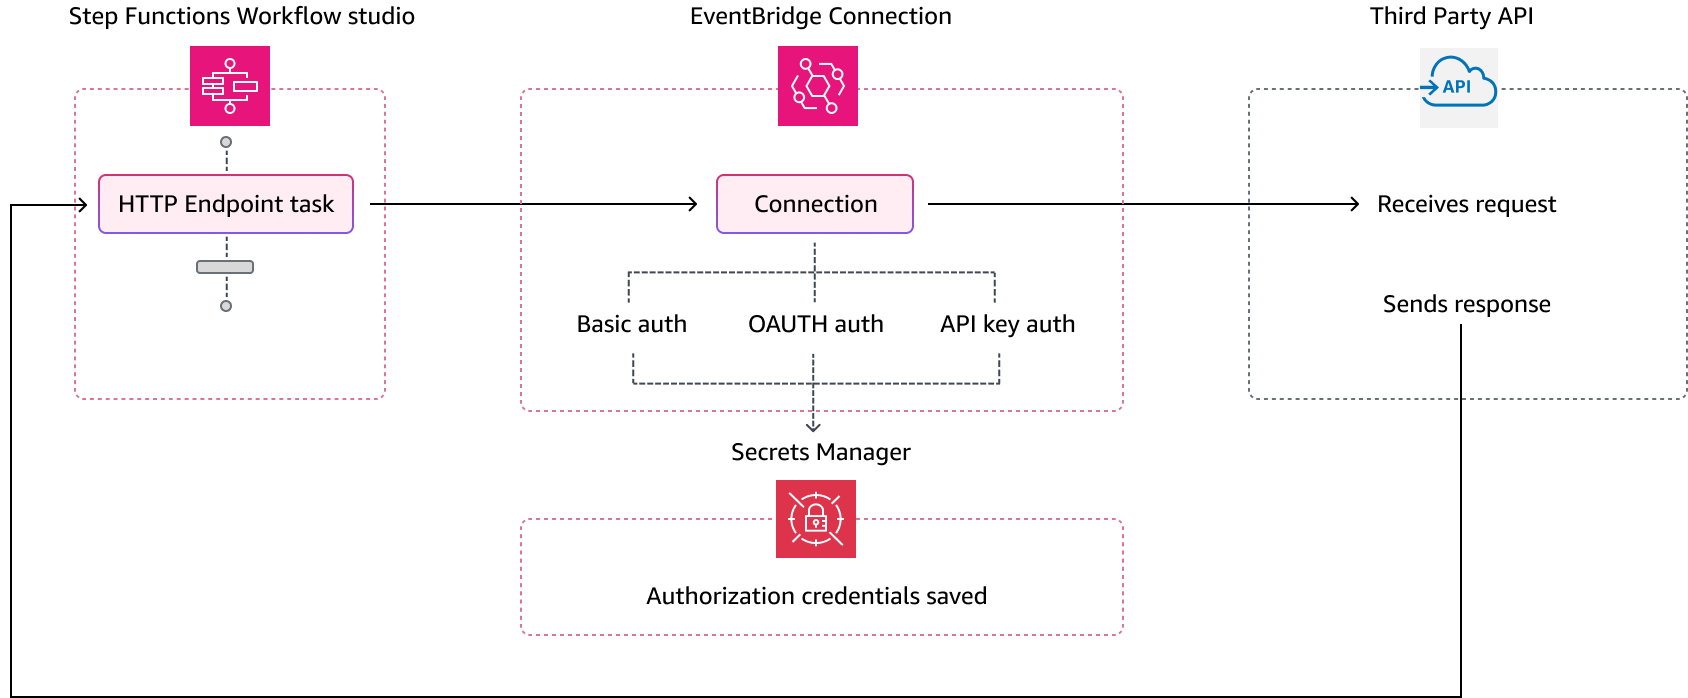 Process Step Functions uses an EventBridge connection which manages authentication credentials of a third-party API provider. EventBridge creates a secret in Secrets Manager to store the connection and authorization parameters in an encrypted form.